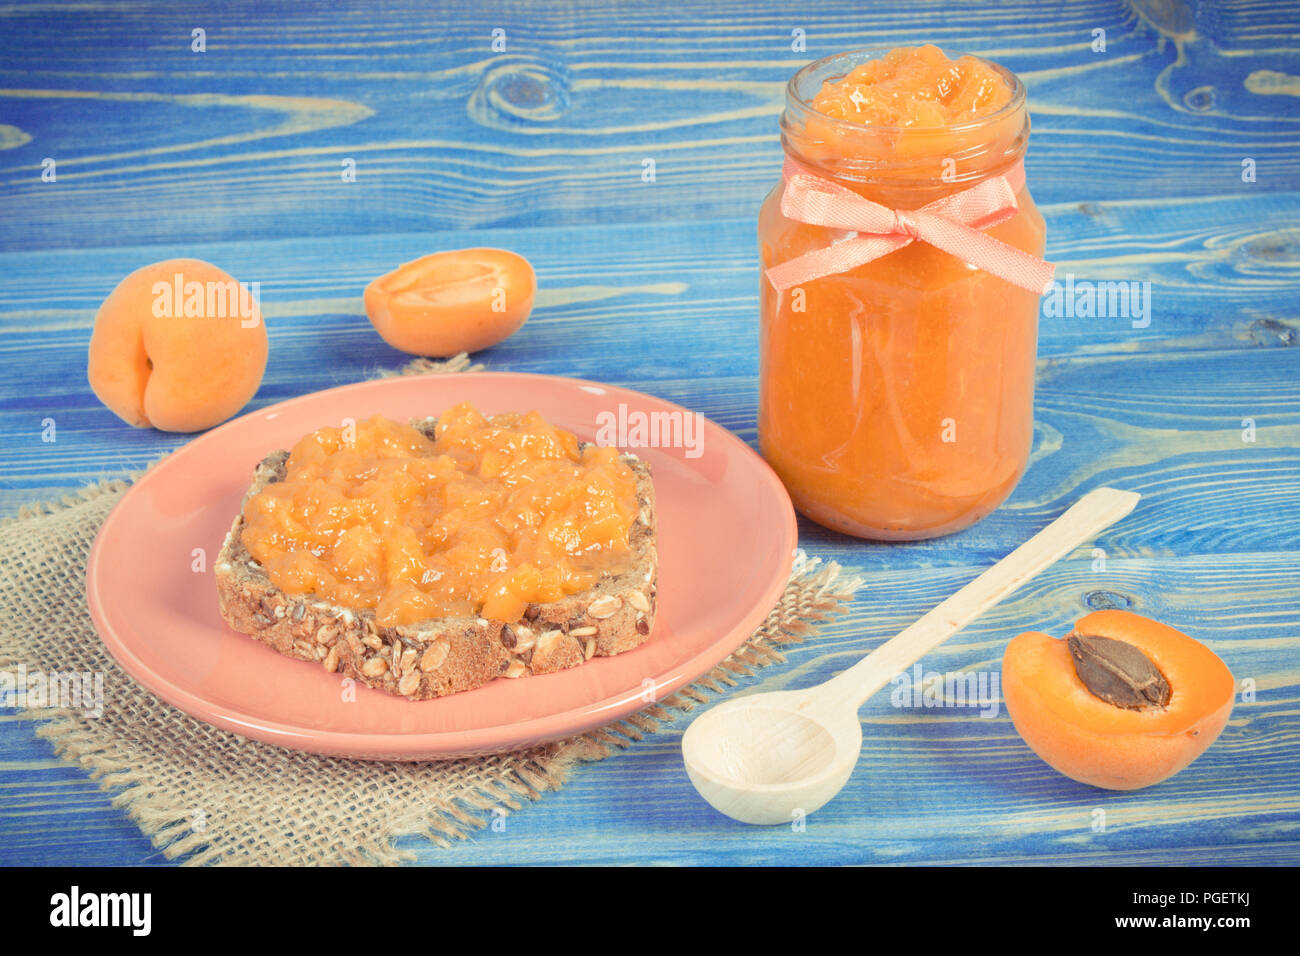 Vintage photo, Fresh prepared sandwich with homemade apricot marmalade and ripe fruits, concept of healthy sweet snack Stock Photo